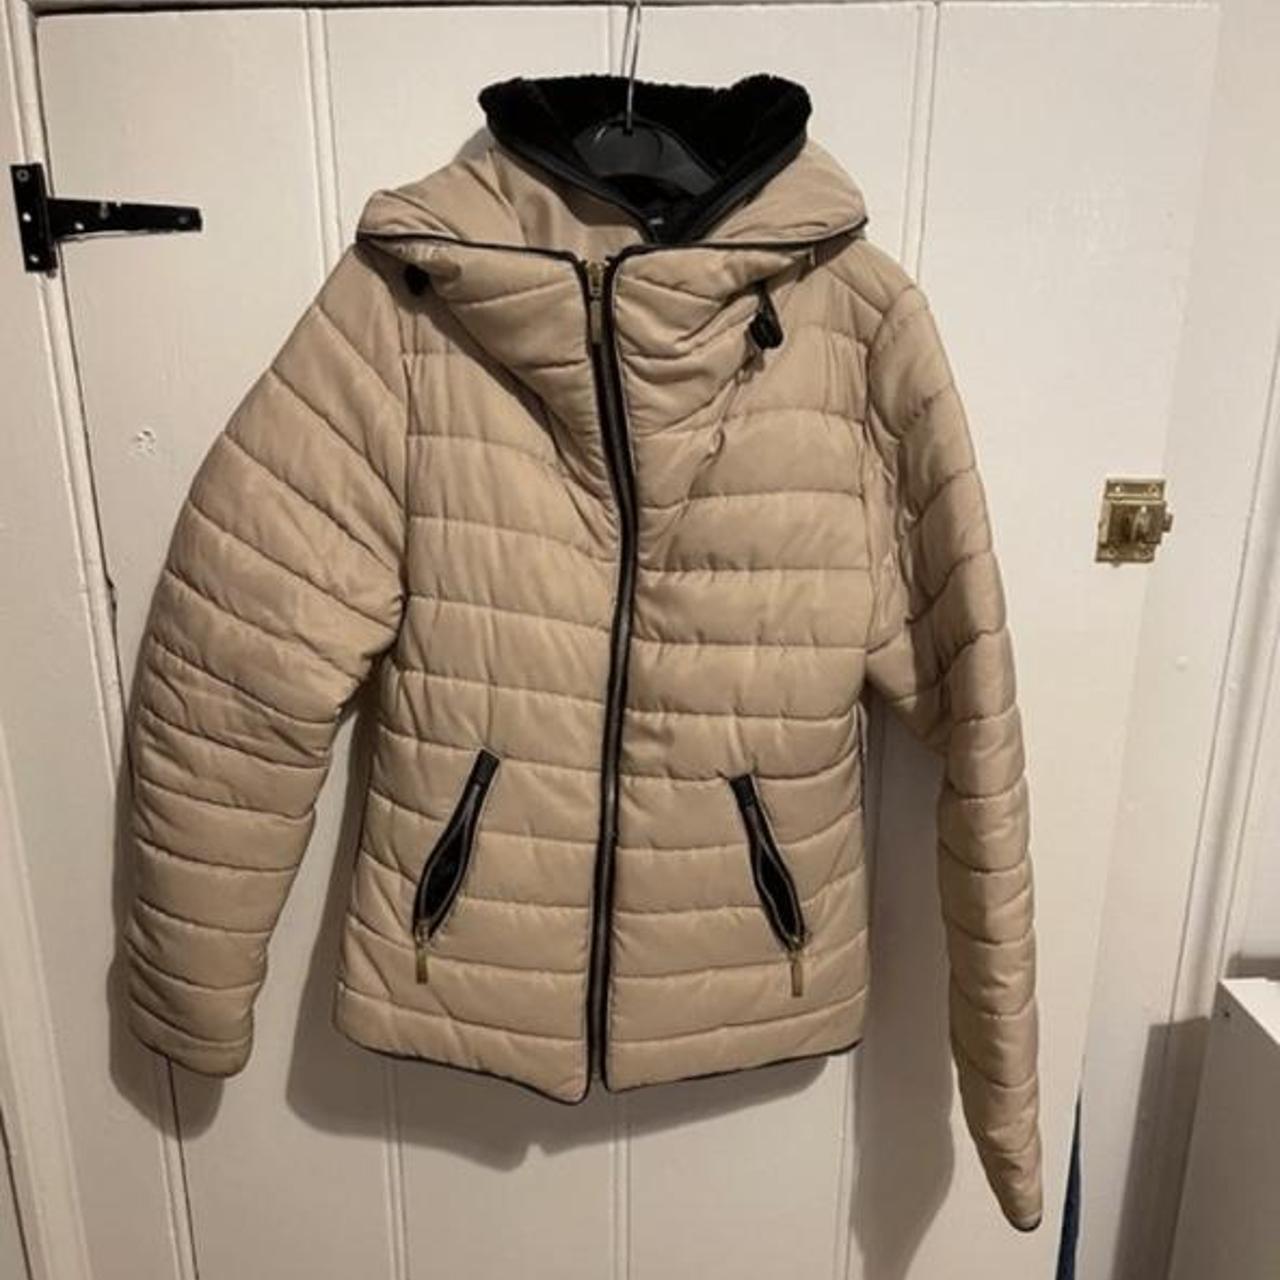 Stone puffer jacket Only worn a few times Really... - Depop